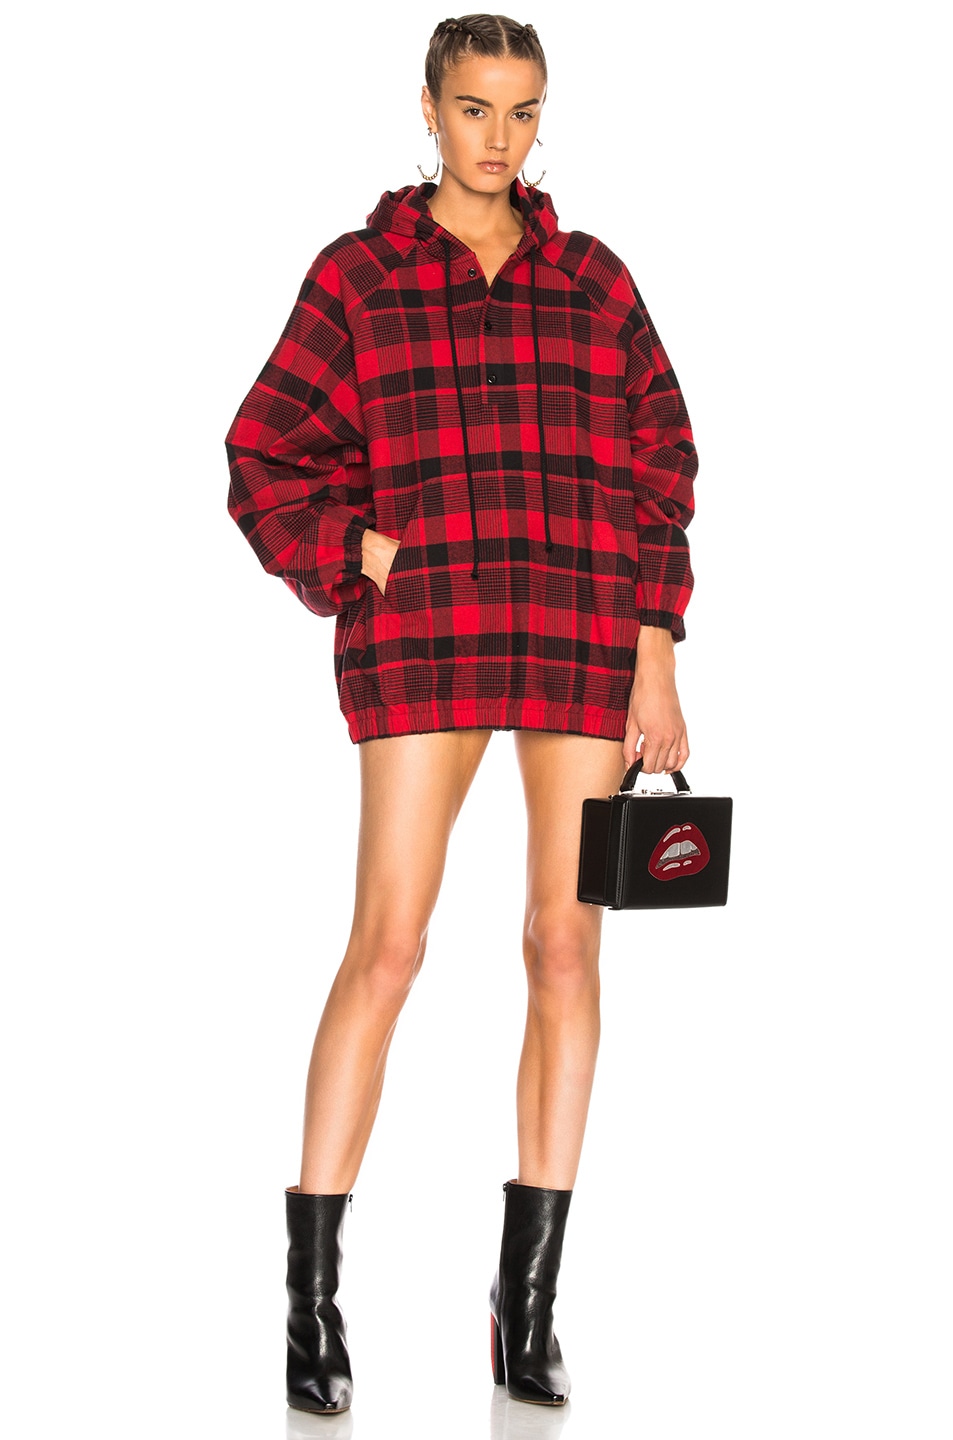 Image 1 of Adaptation Plaid Popover Top in Red & Black Plaid